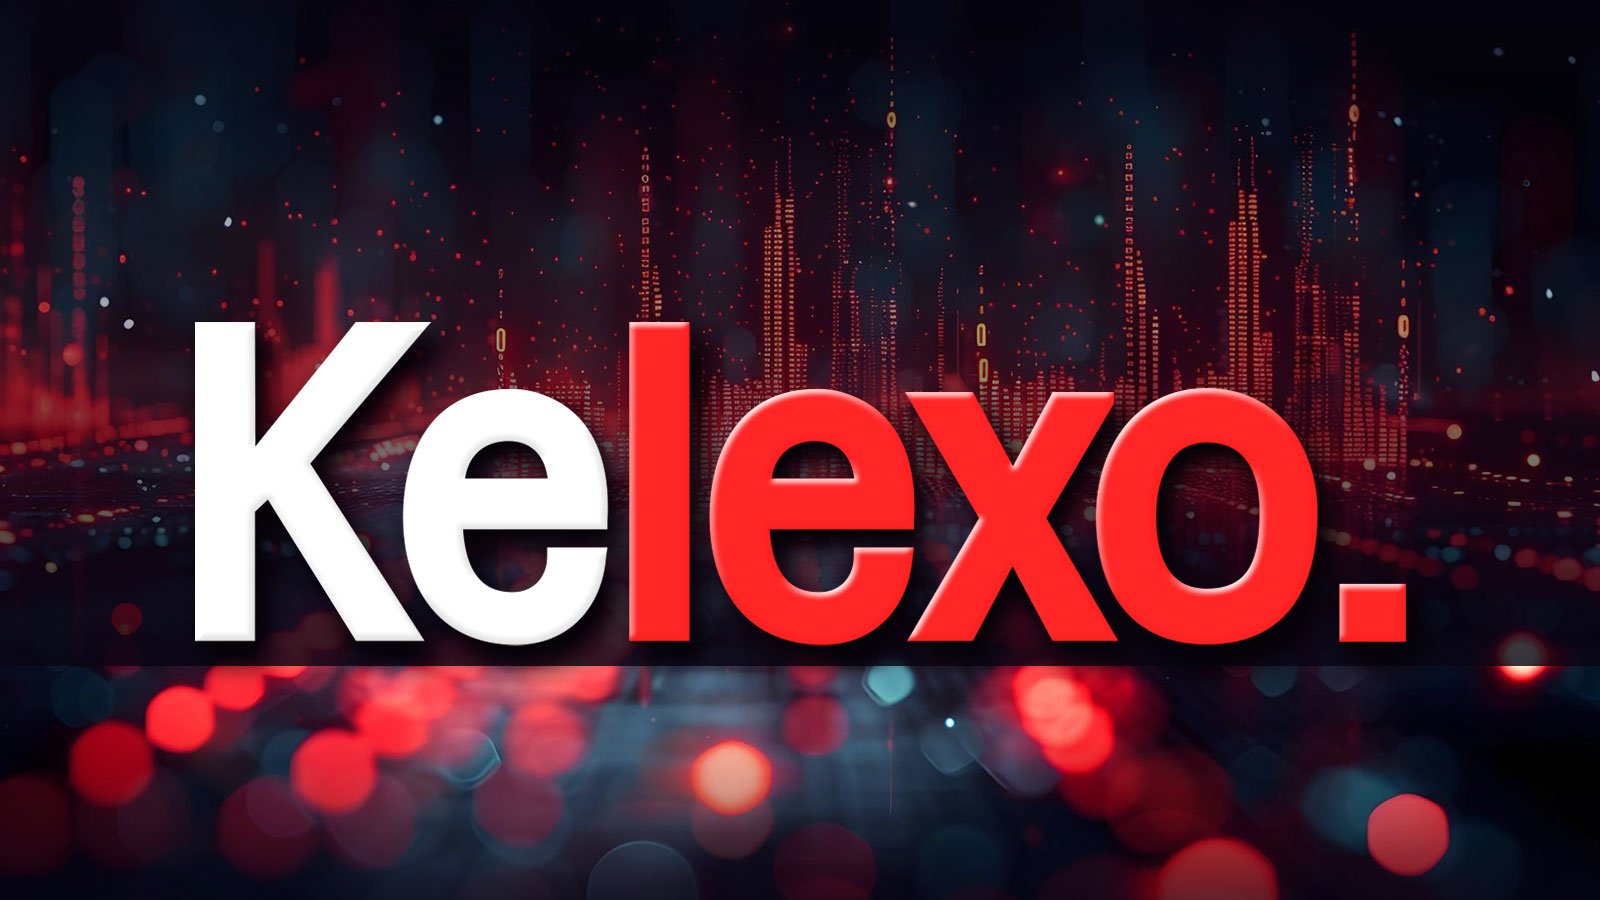 Kelexo (KLXO) Token Release Program Might be Gaining Attention in April as Uniswap (UNI), Chainlink (LINK) Major Altcoins Look Strong